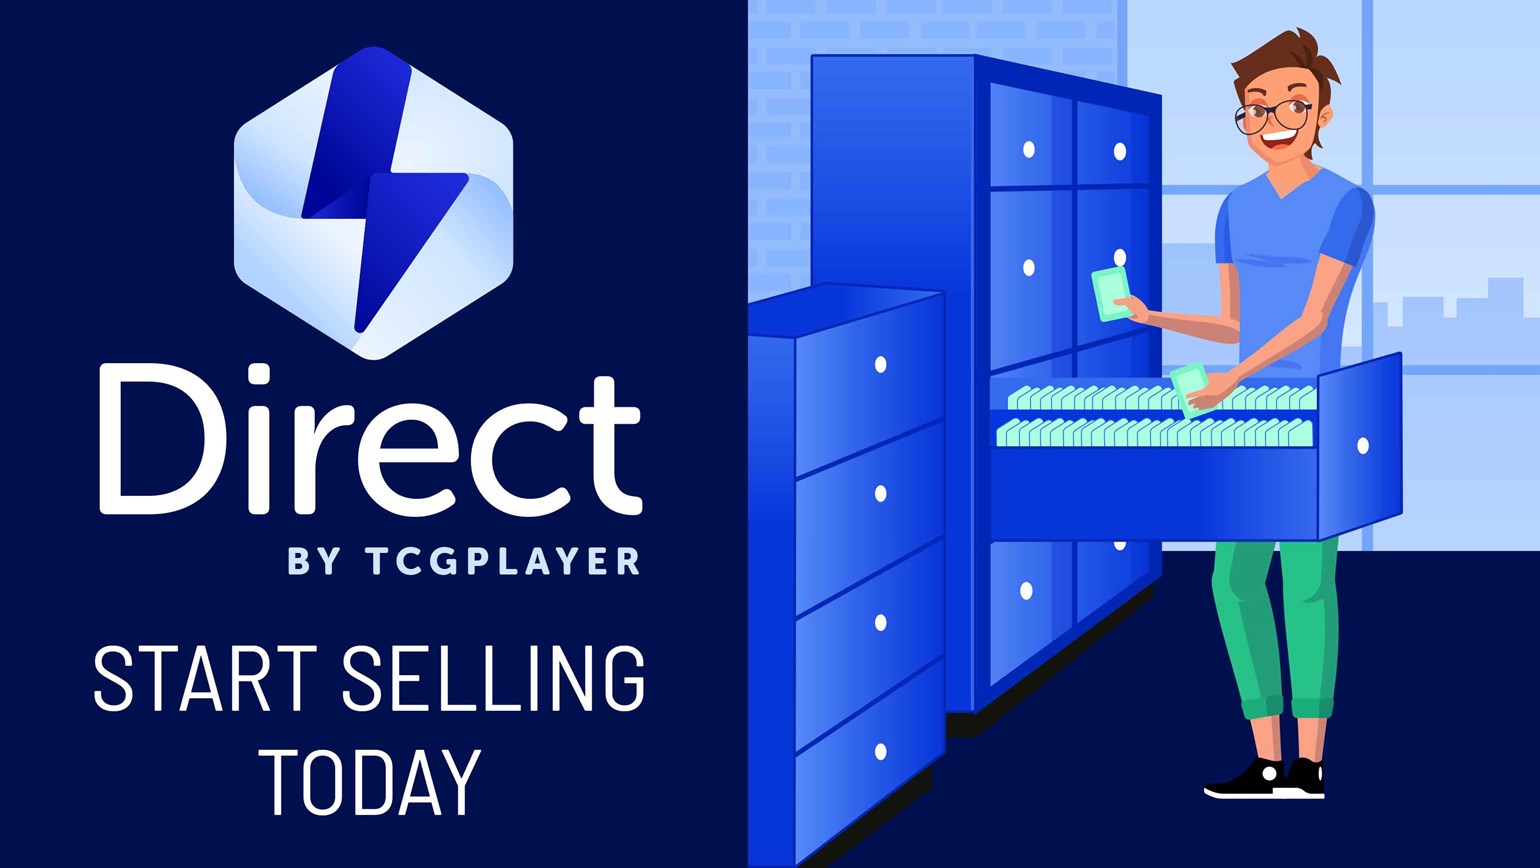 Direct by TCGplayer: Start Selling Today